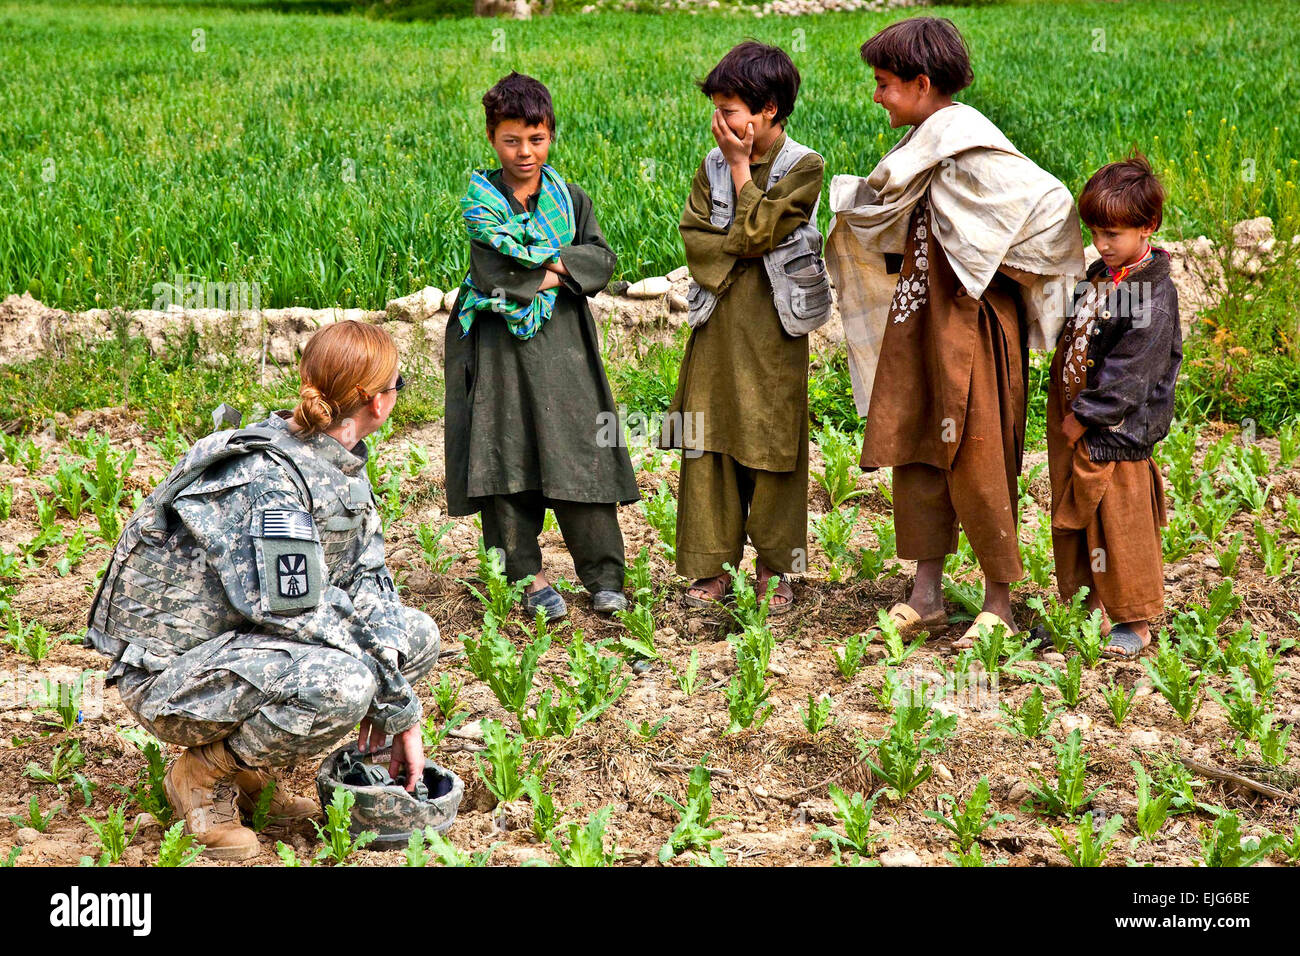 U.S. Army Capt. Rebecca Dimurco speaks with Afghan children during an operation to transport patients in Uruzgan province, Afghanistan, March 28, 2010.  Spc. Nicholas T. Loyd Stock Photo